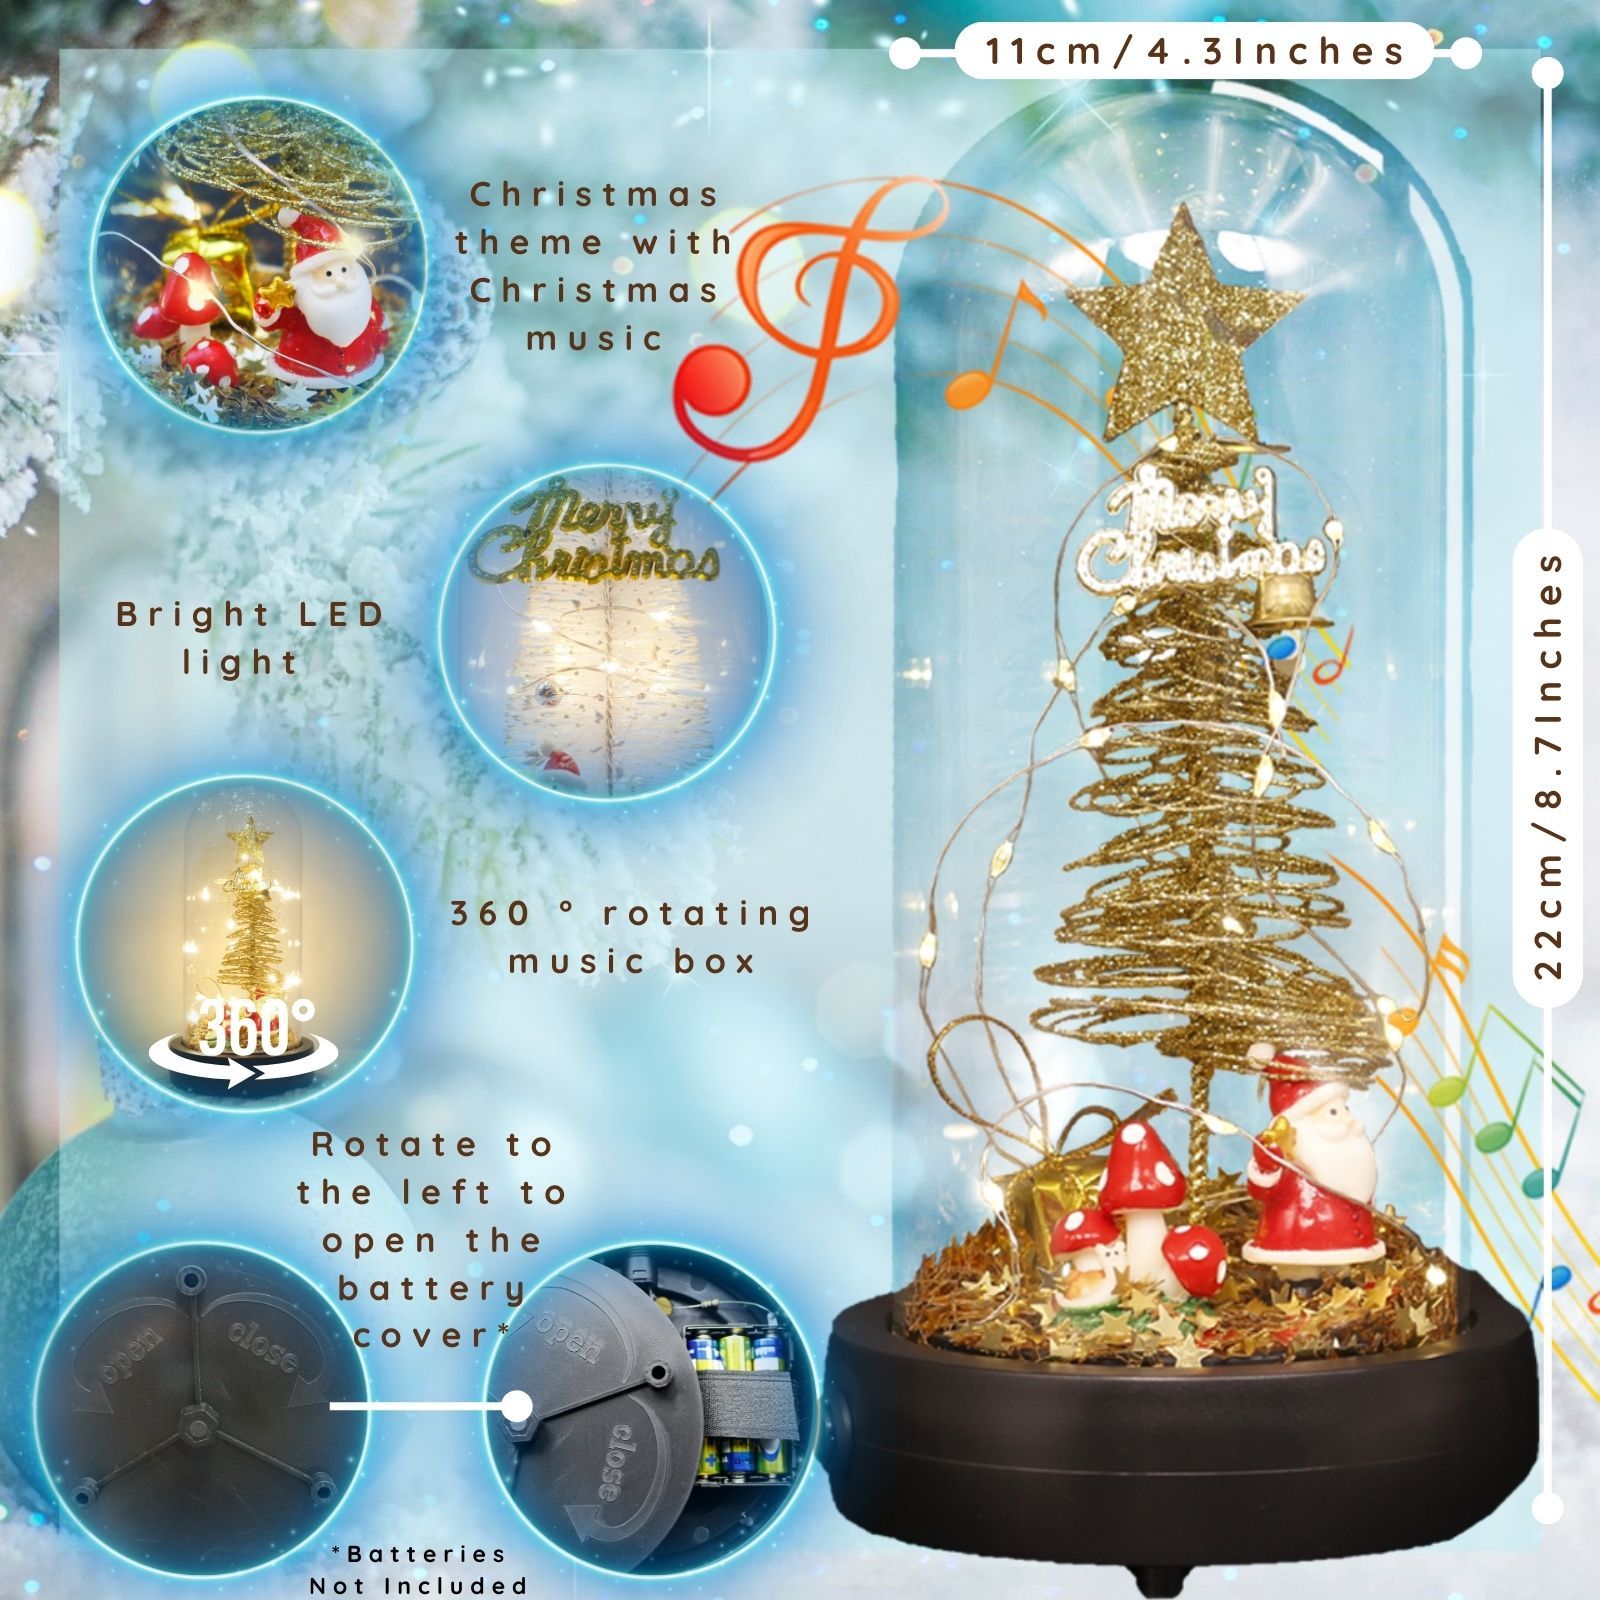 uniqicon LED Christmas Tree Music Box in Glass Dome with Santa Claus, Snowflakes Decorations Tree Present, Indoor Home Decor Gifts, Christmas Music Wooden Box Gifts for Girls Women Mom Friend - uniqicon